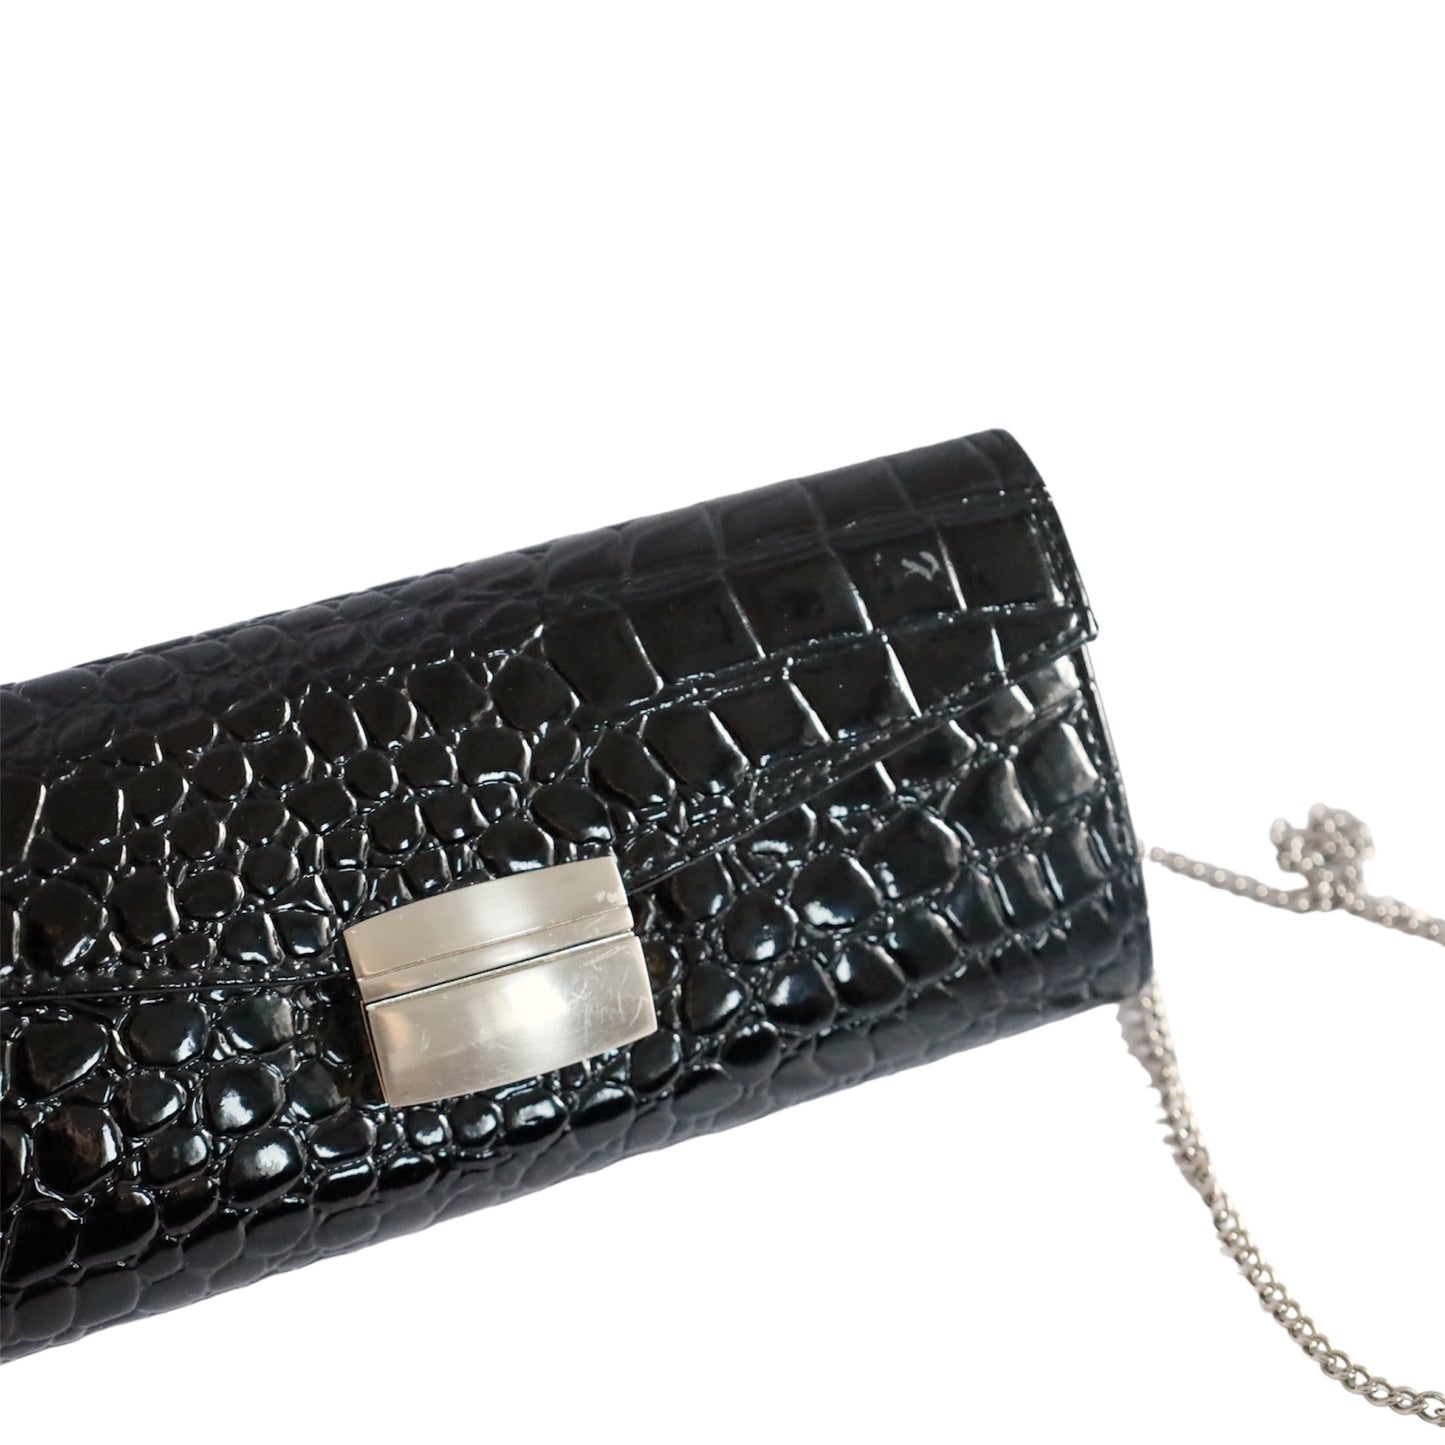 Black Patent Leather Clutch bag with Chain Strap